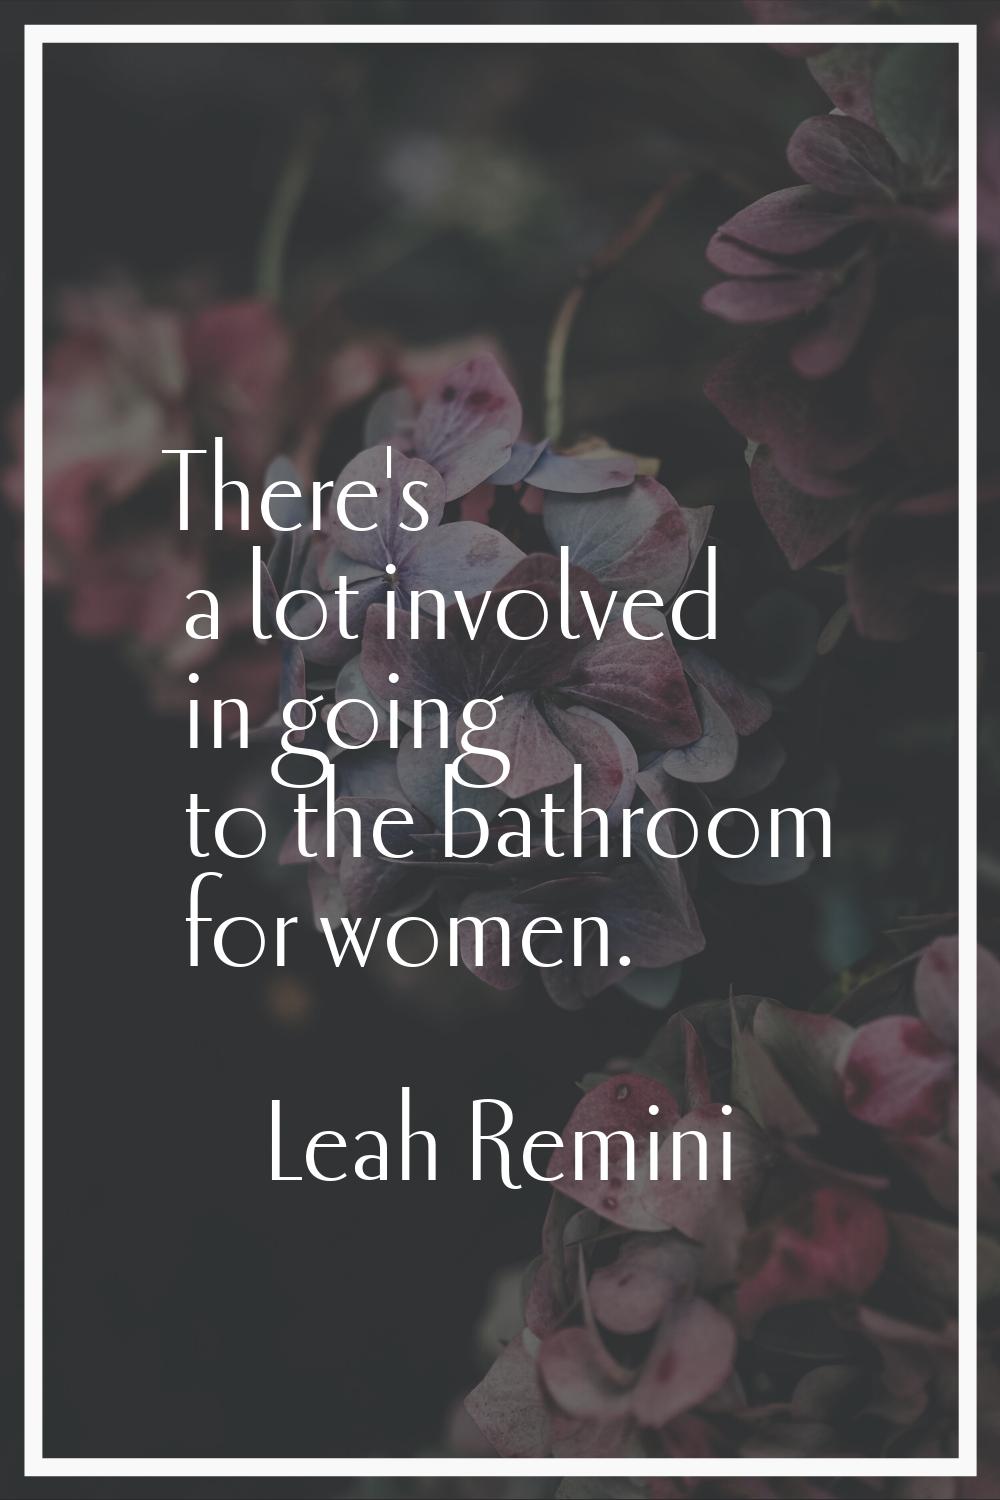 There's a lot involved in going to the bathroom for women.